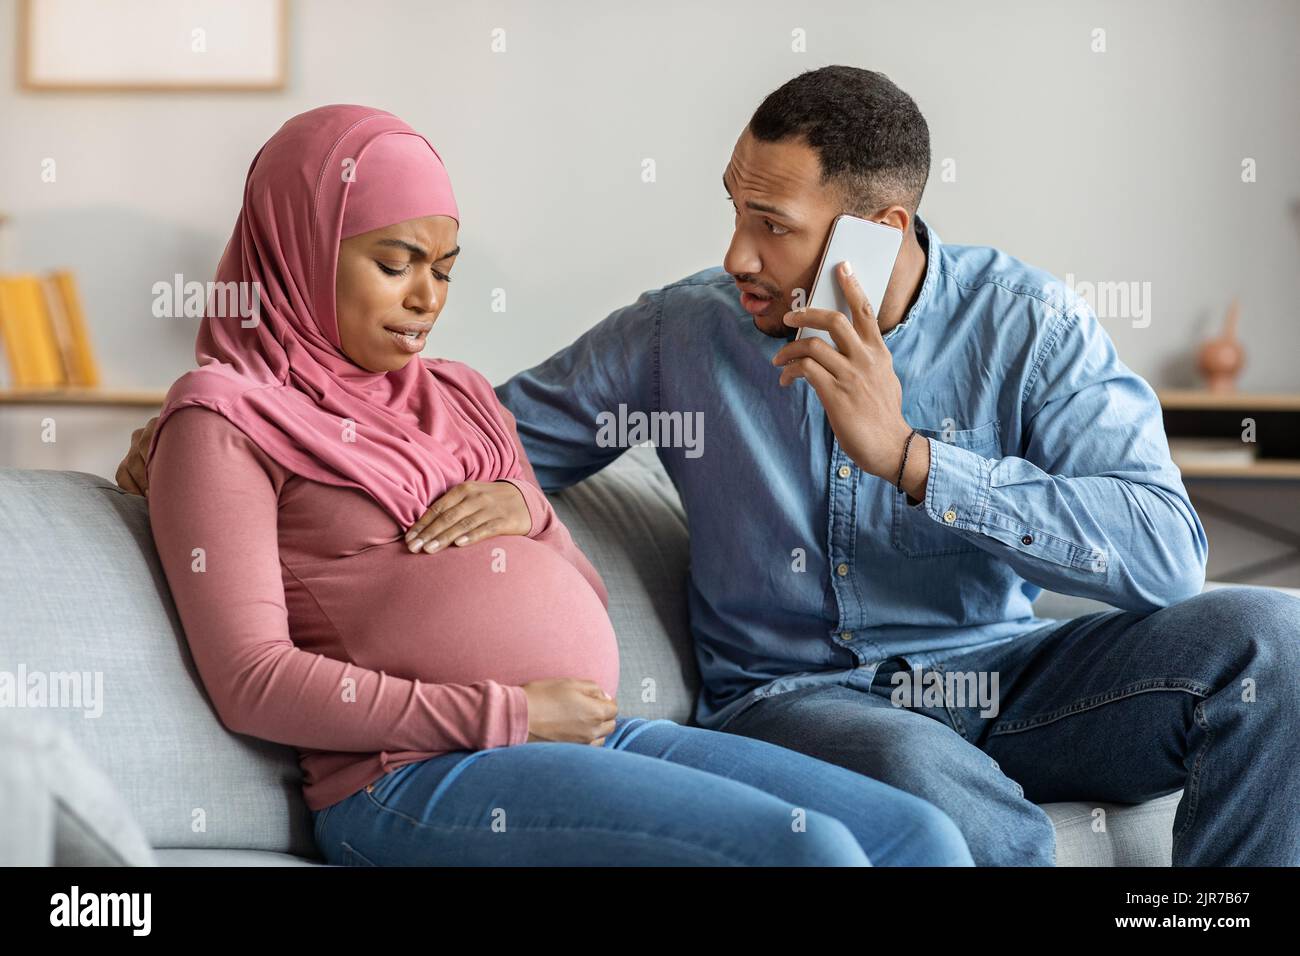 Worried Man Calling Doctor While His Pregnant Muslim Wife Suffering Prenatal Contractions Stock Photo